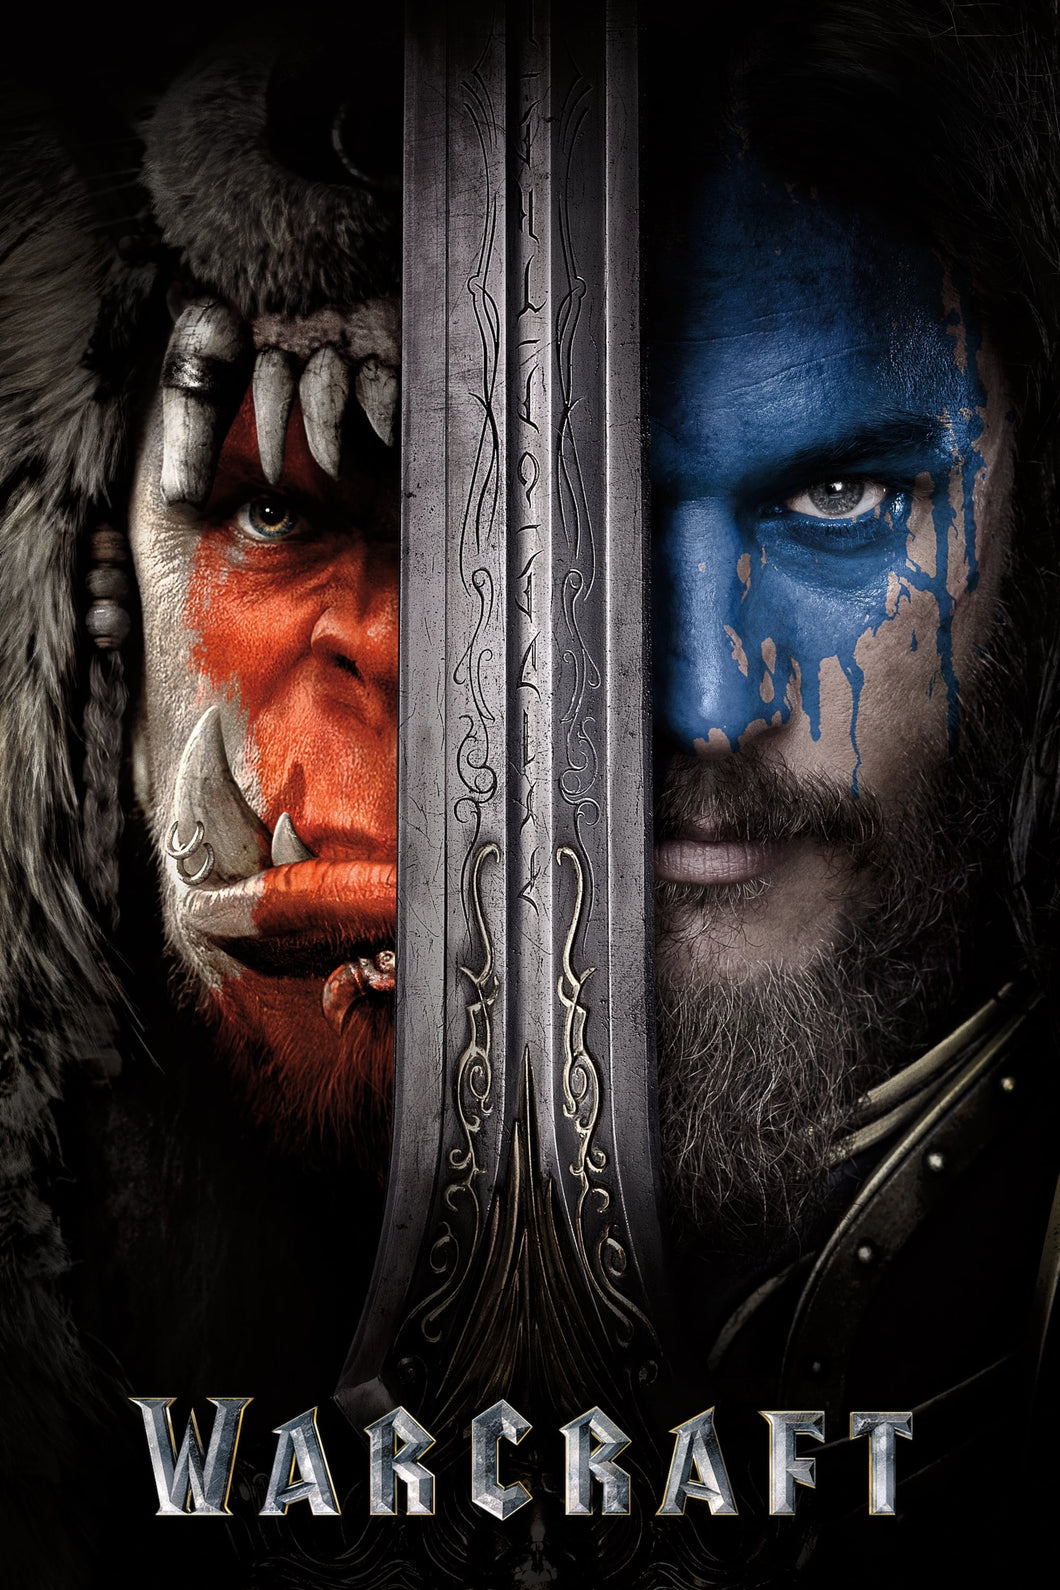 Warcraft (2016) Movie Poster Framed or Unframed Glossy Poster Free UK Shipping!!!